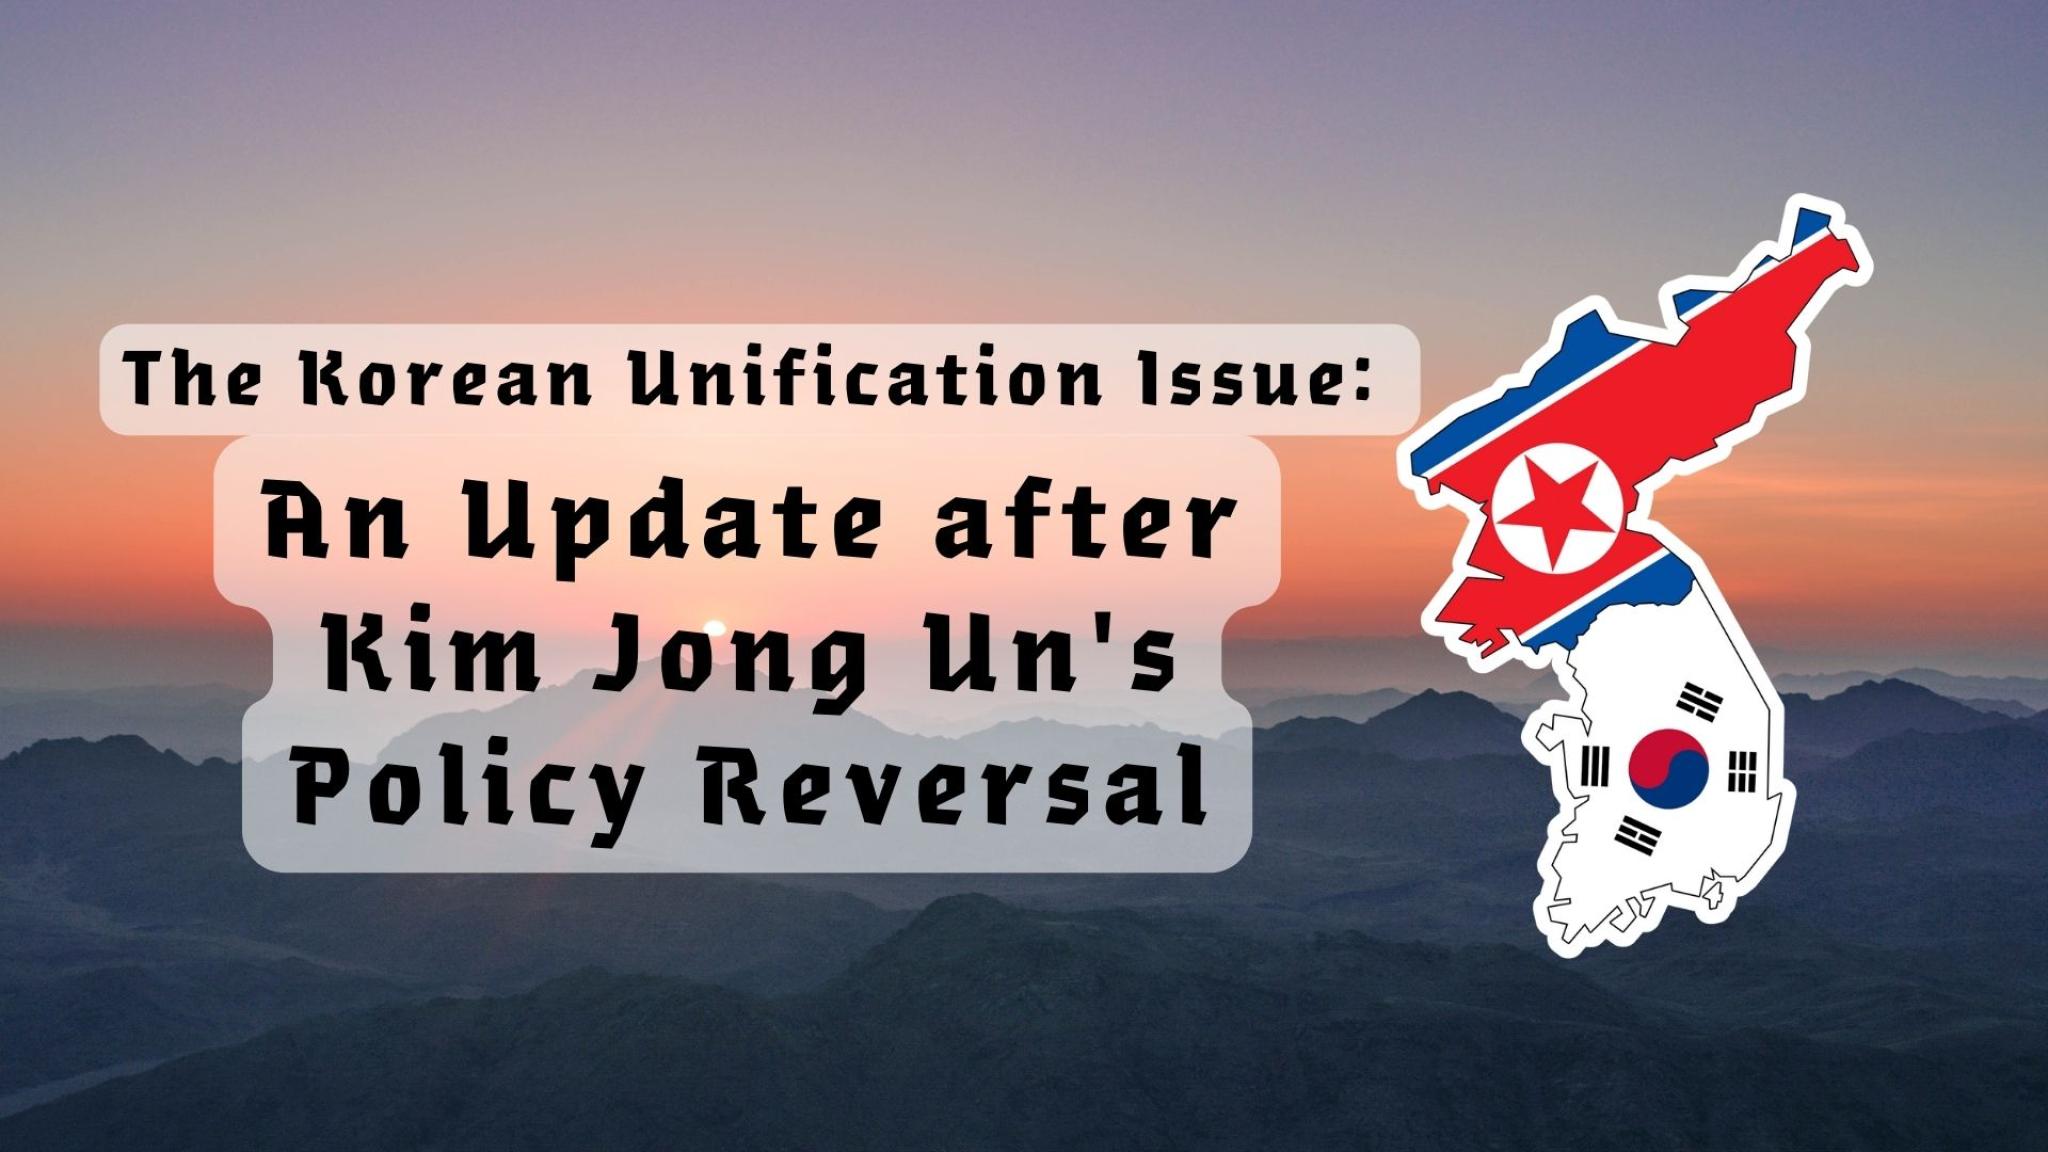 The Korean unification issue: An update after Kim Jong Un's policy reversal